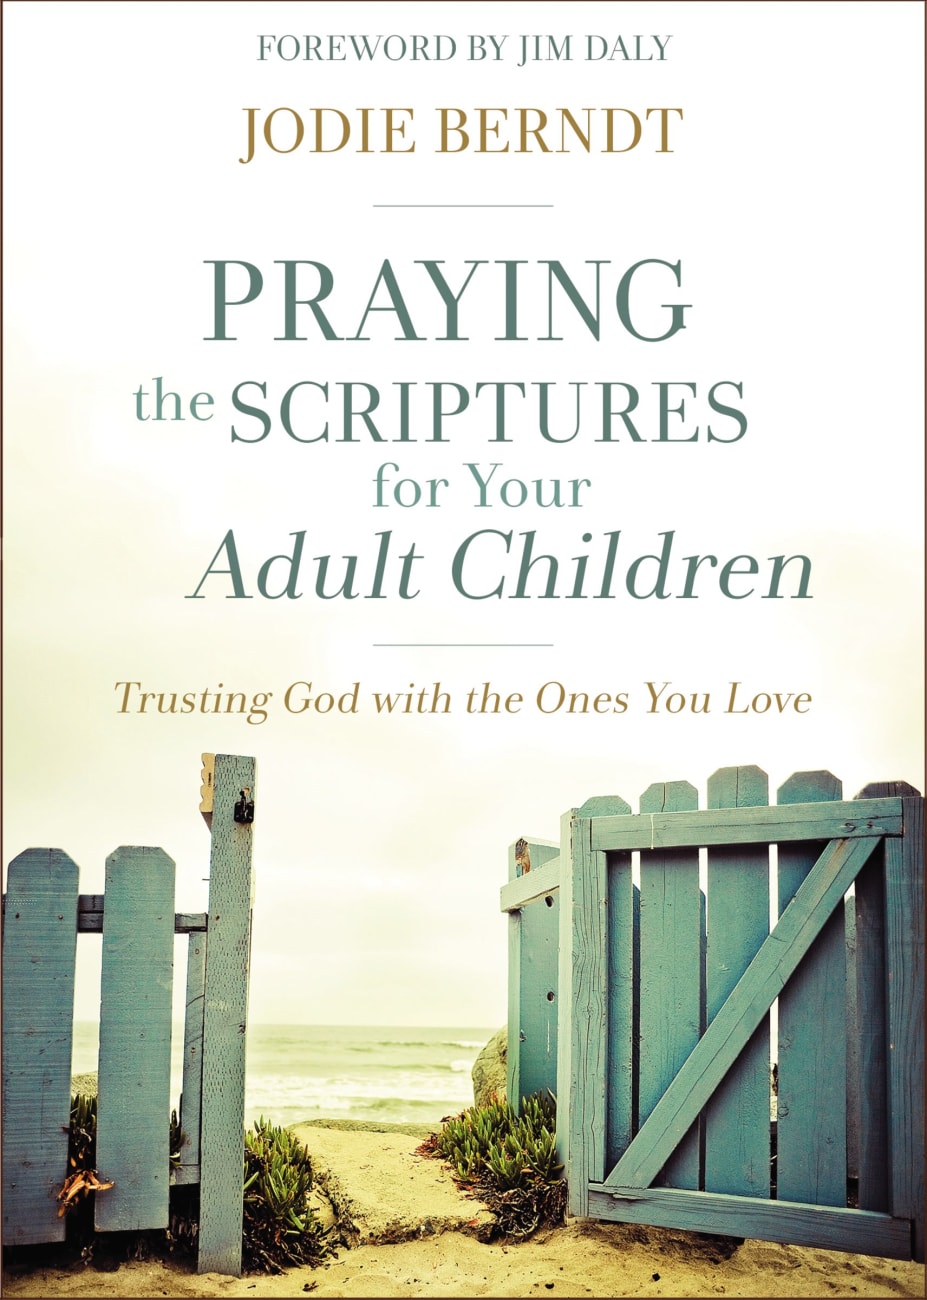 Praying the Scriptures For Your Adult Children: Trusting God With the Ones You Love Paperback